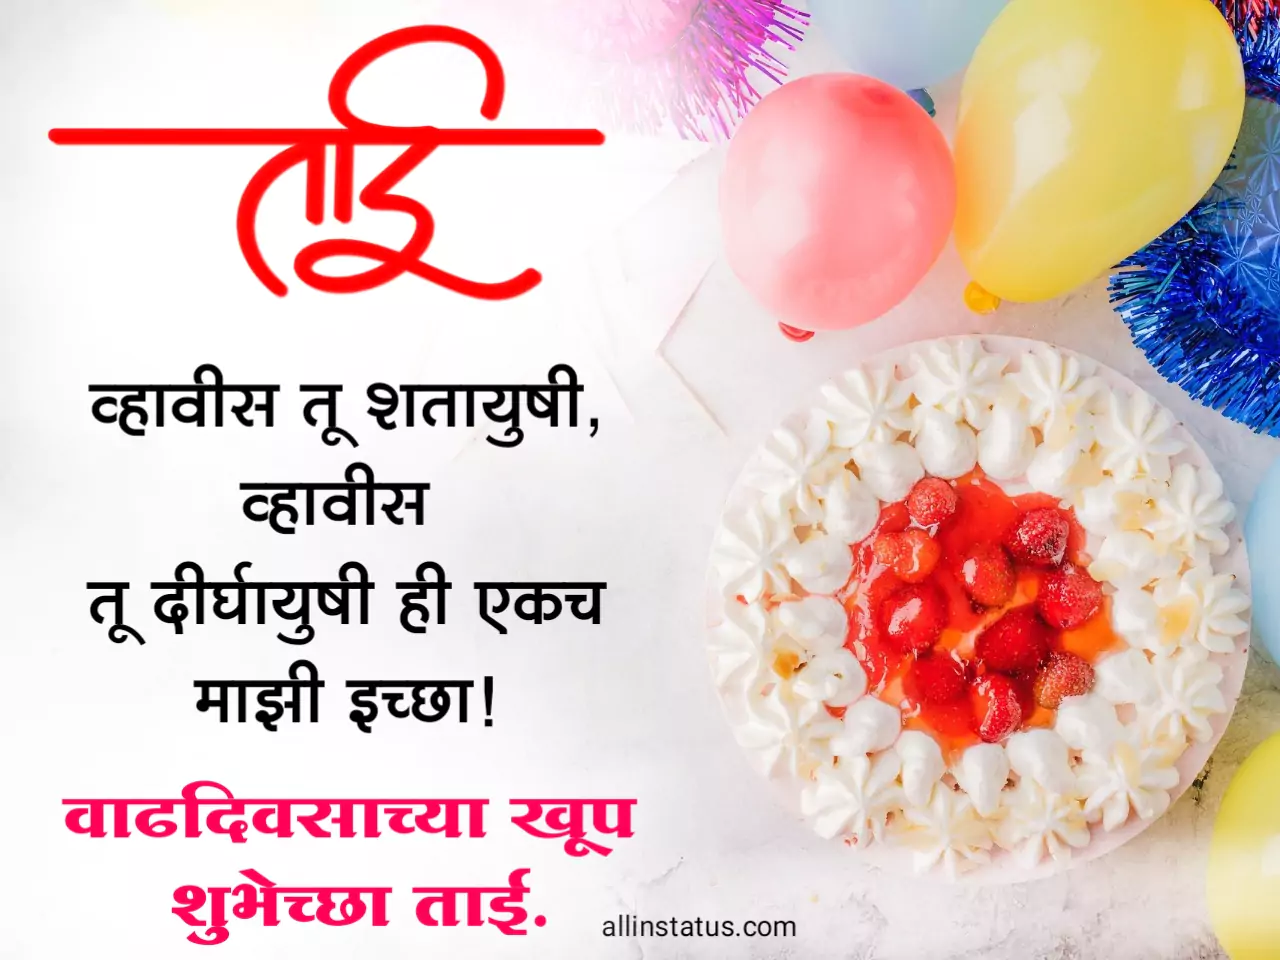 Happy Birthday wishes for sister in marathi